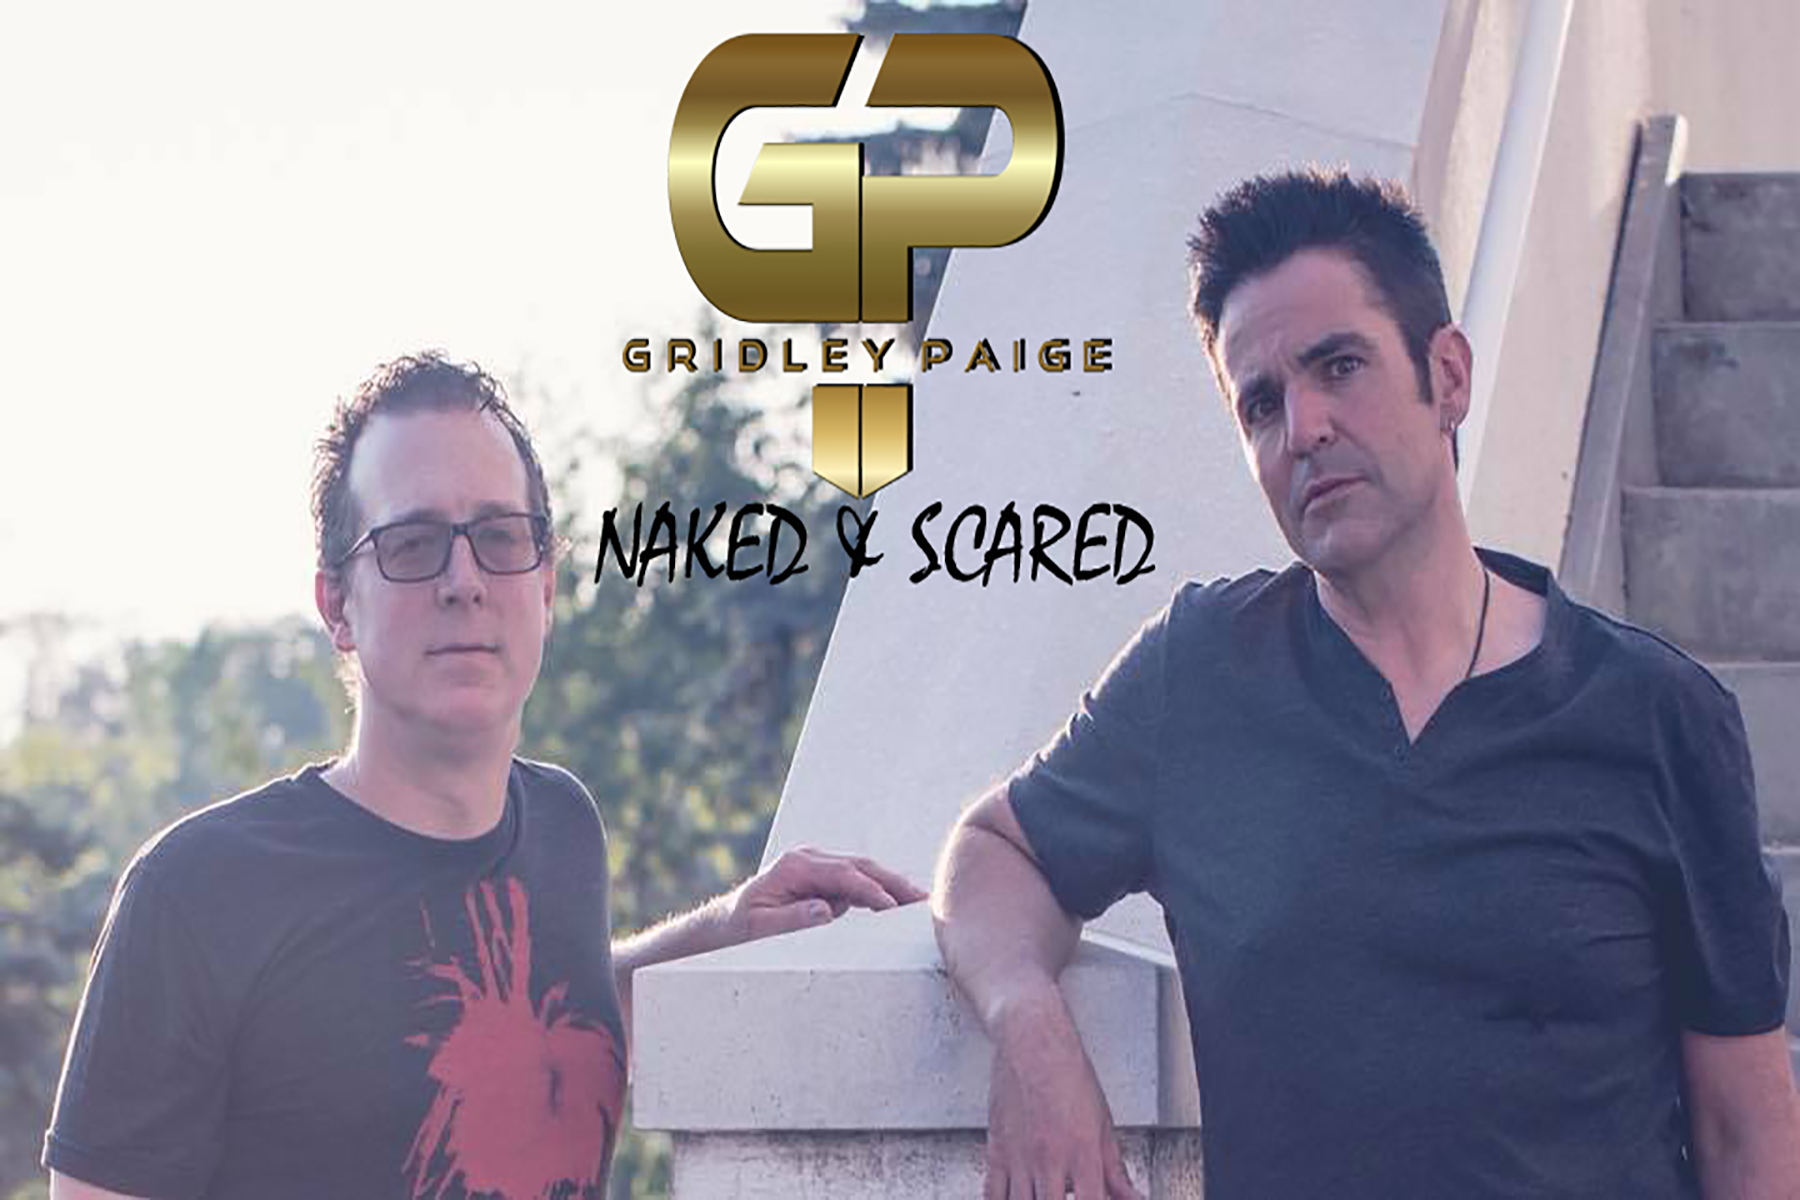 gp naked and scared band image with logo